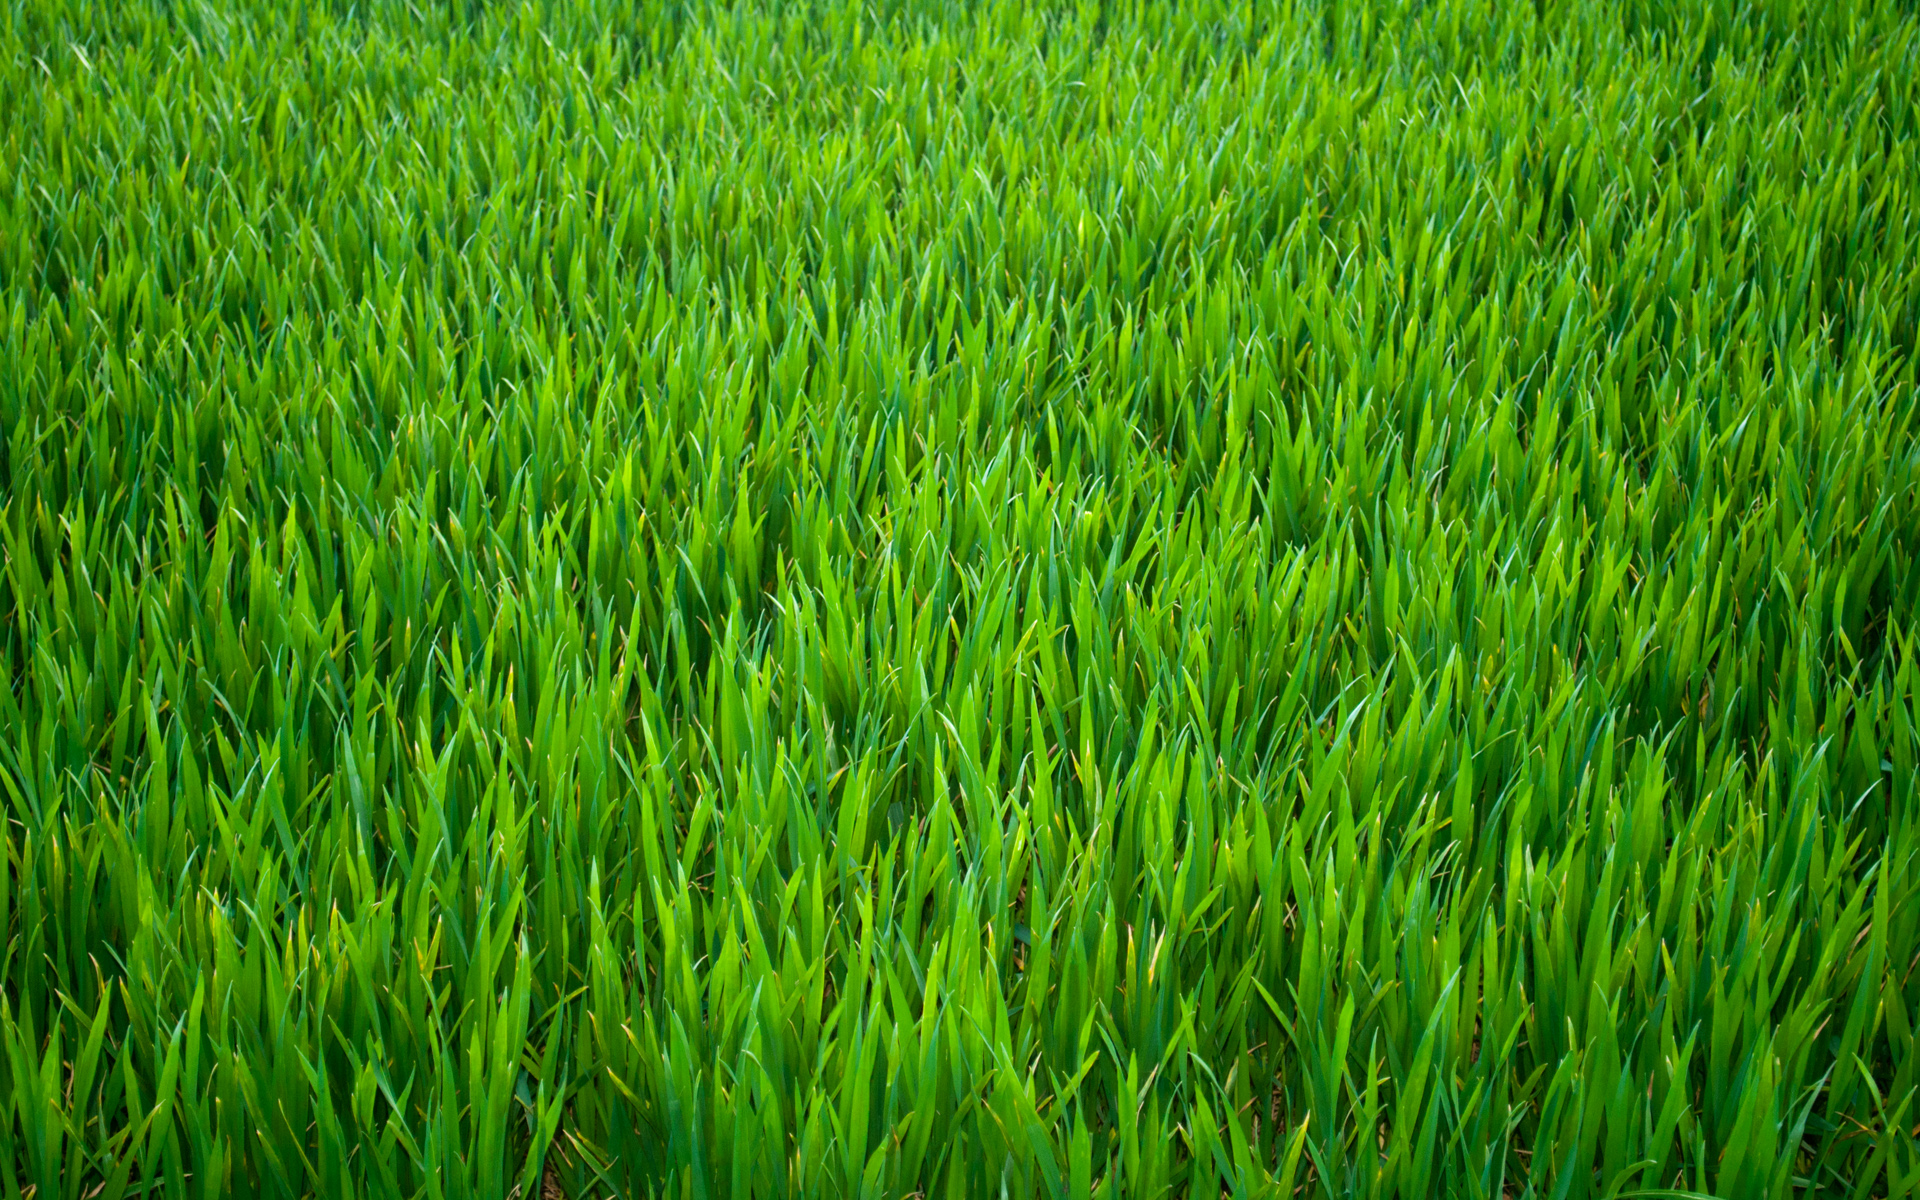 Grass Pictures wallpaper | 1920x1200 | #80787